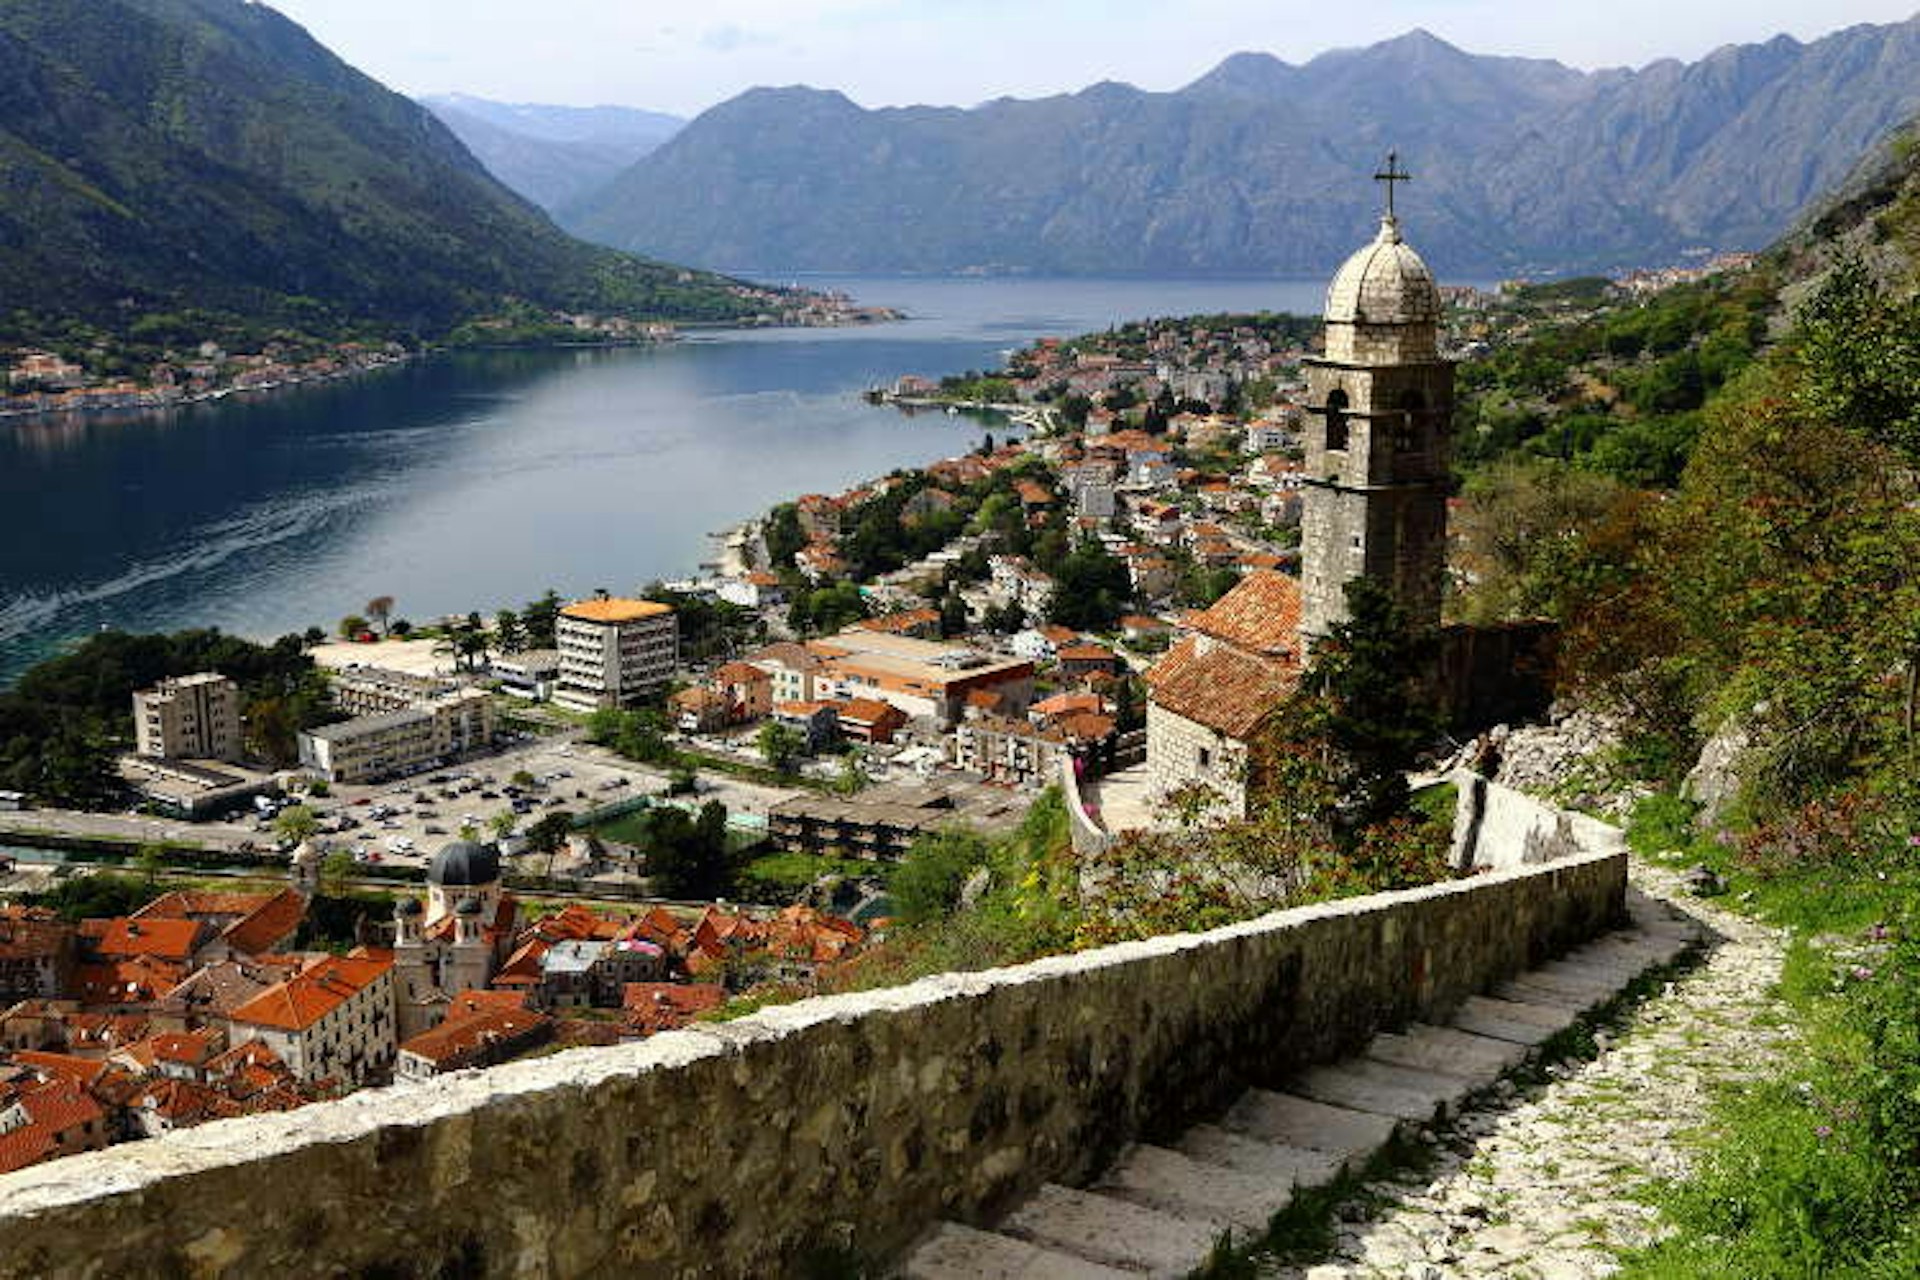 The unbeatable view across the bay from the hills above Kotor. Image by Sollymonster / Getty Images